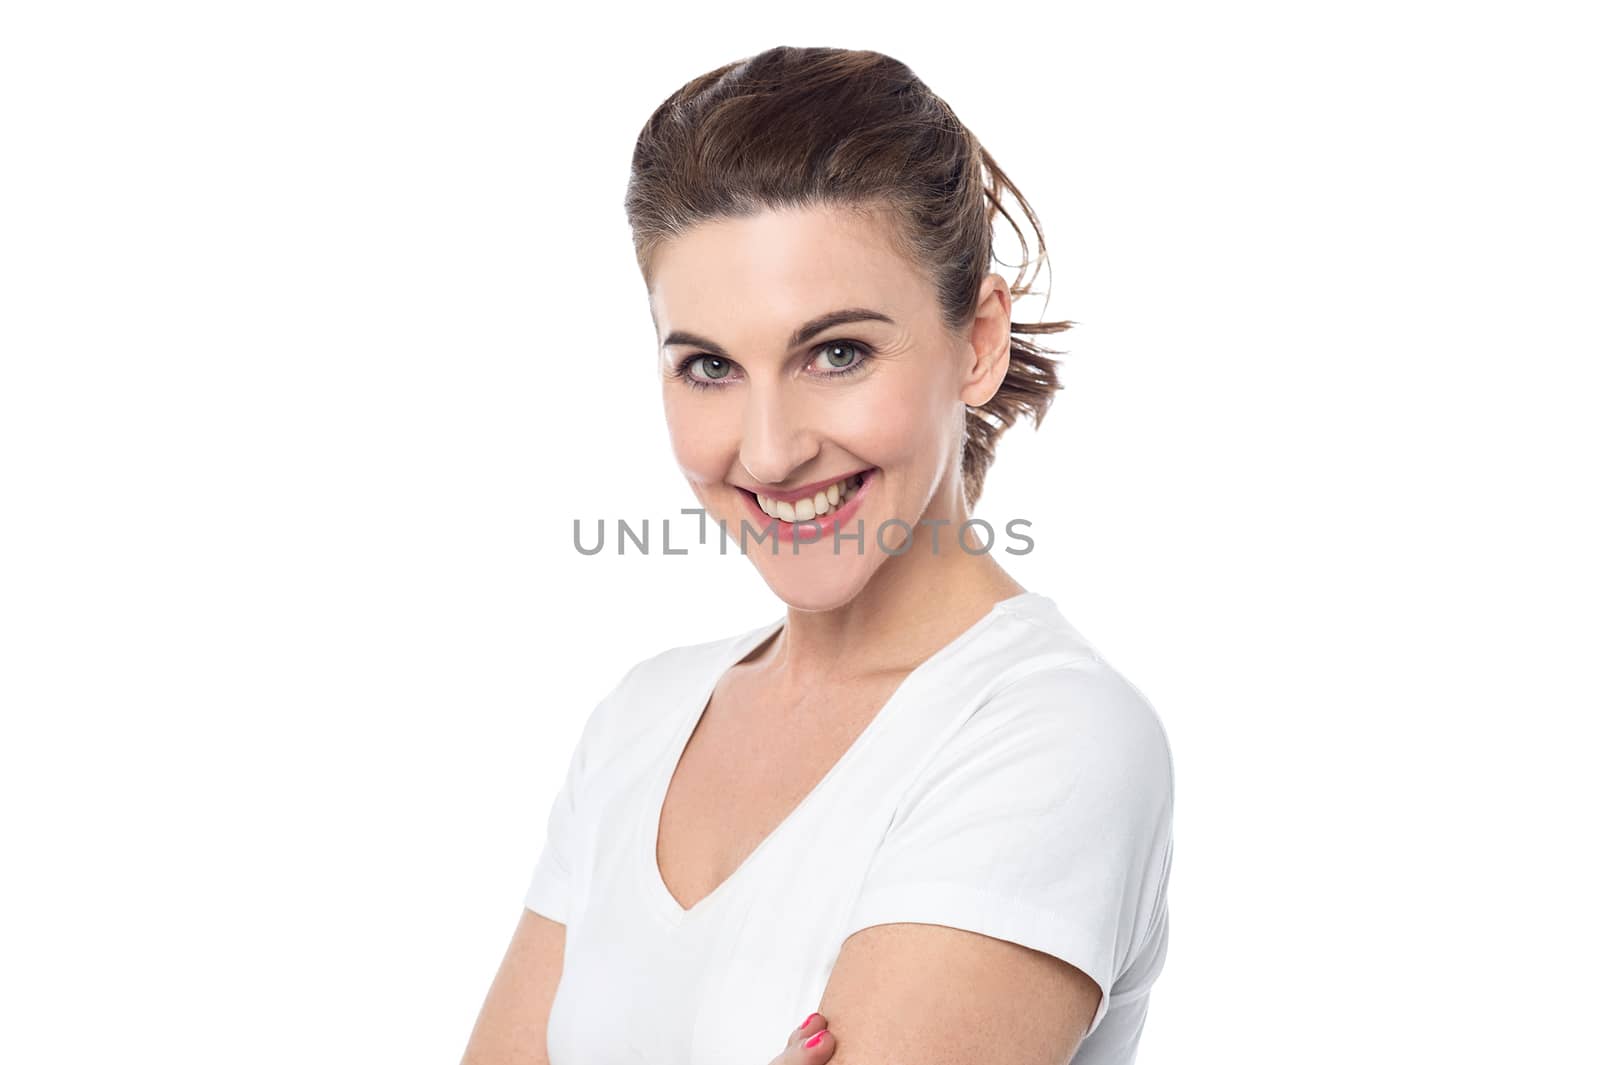 Smiling woman looking at camera by stockyimages